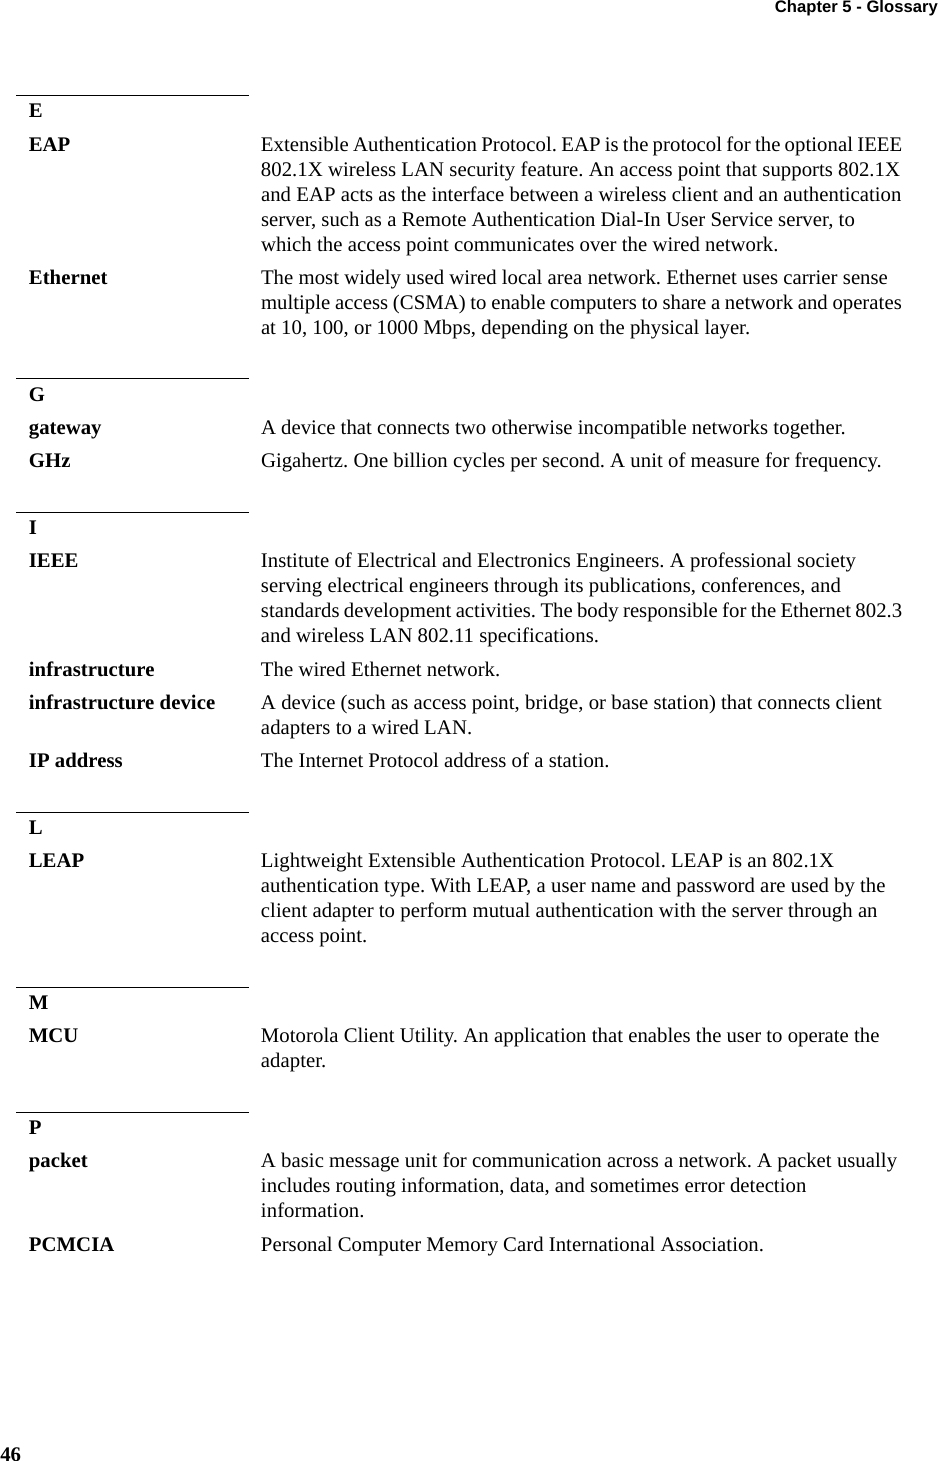 Chapter 5 - Glossary46EEAP Extensible Authentication Protocol. EAP is the protocol for the optional IEEE 802.1X wireless LAN security feature. An access point that supports 802.1X and EAP acts as the interface between a wireless client and an authentication server, such as a Remote Authentication Dial-In User Service server, to which the access point communicates over the wired network.Ethernet The most widely used wired local area network. Ethernet uses carrier sense multiple access (CSMA) to enable computers to share a network and operates at 10, 100, or 1000 Mbps, depending on the physical layer.Ggateway A device that connects two otherwise incompatible networks together.GHz Gigahertz. One billion cycles per second. A unit of measure for frequency.IIEEE Institute of Electrical and Electronics Engineers. A professional society serving electrical engineers through its publications, conferences, and standards development activities. The body responsible for the Ethernet 802.3 and wireless LAN 802.11 specifications.infrastructure The wired Ethernet network.infrastructure device A device (such as access point, bridge, or base station) that connects client adapters to a wired LAN.IP address The Internet Protocol address of a station.LLEAP Lightweight Extensible Authentication Protocol. LEAP is an 802.1X authentication type. With LEAP, a user name and password are used by the client adapter to perform mutual authentication with the server through an access point.MMCU Motorola Client Utility. An application that enables the user to operate the adapter.Ppacket A basic message unit for communication across a network. A packet usually includes routing information, data, and sometimes error detection information.PCMCIA Personal Computer Memory Card International Association.